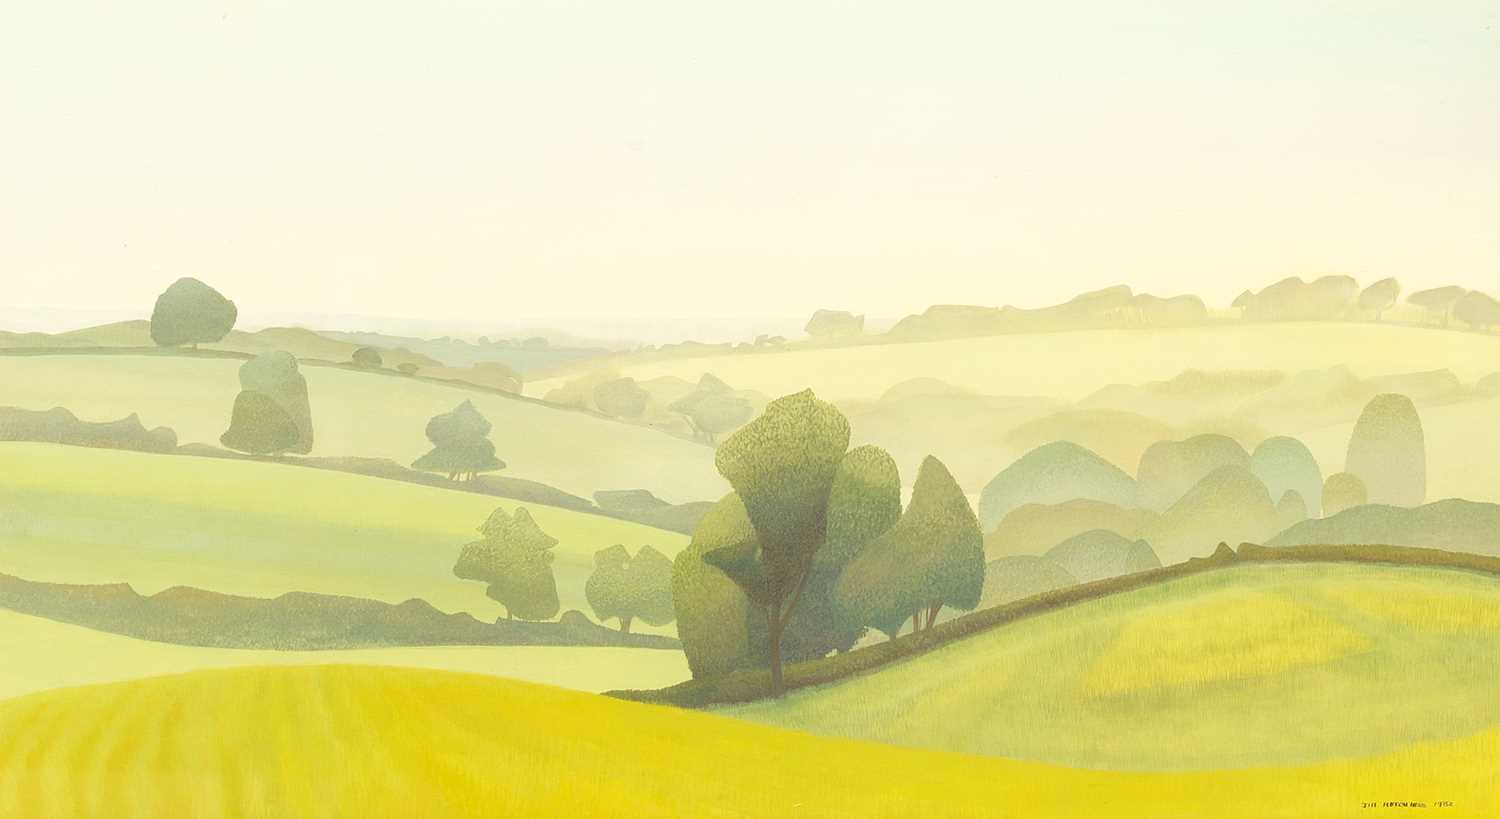 Jill Hutchings (20th Century) Rolling Hills, 1982 signed and dated (lower right) gouache 20 x 38cm.